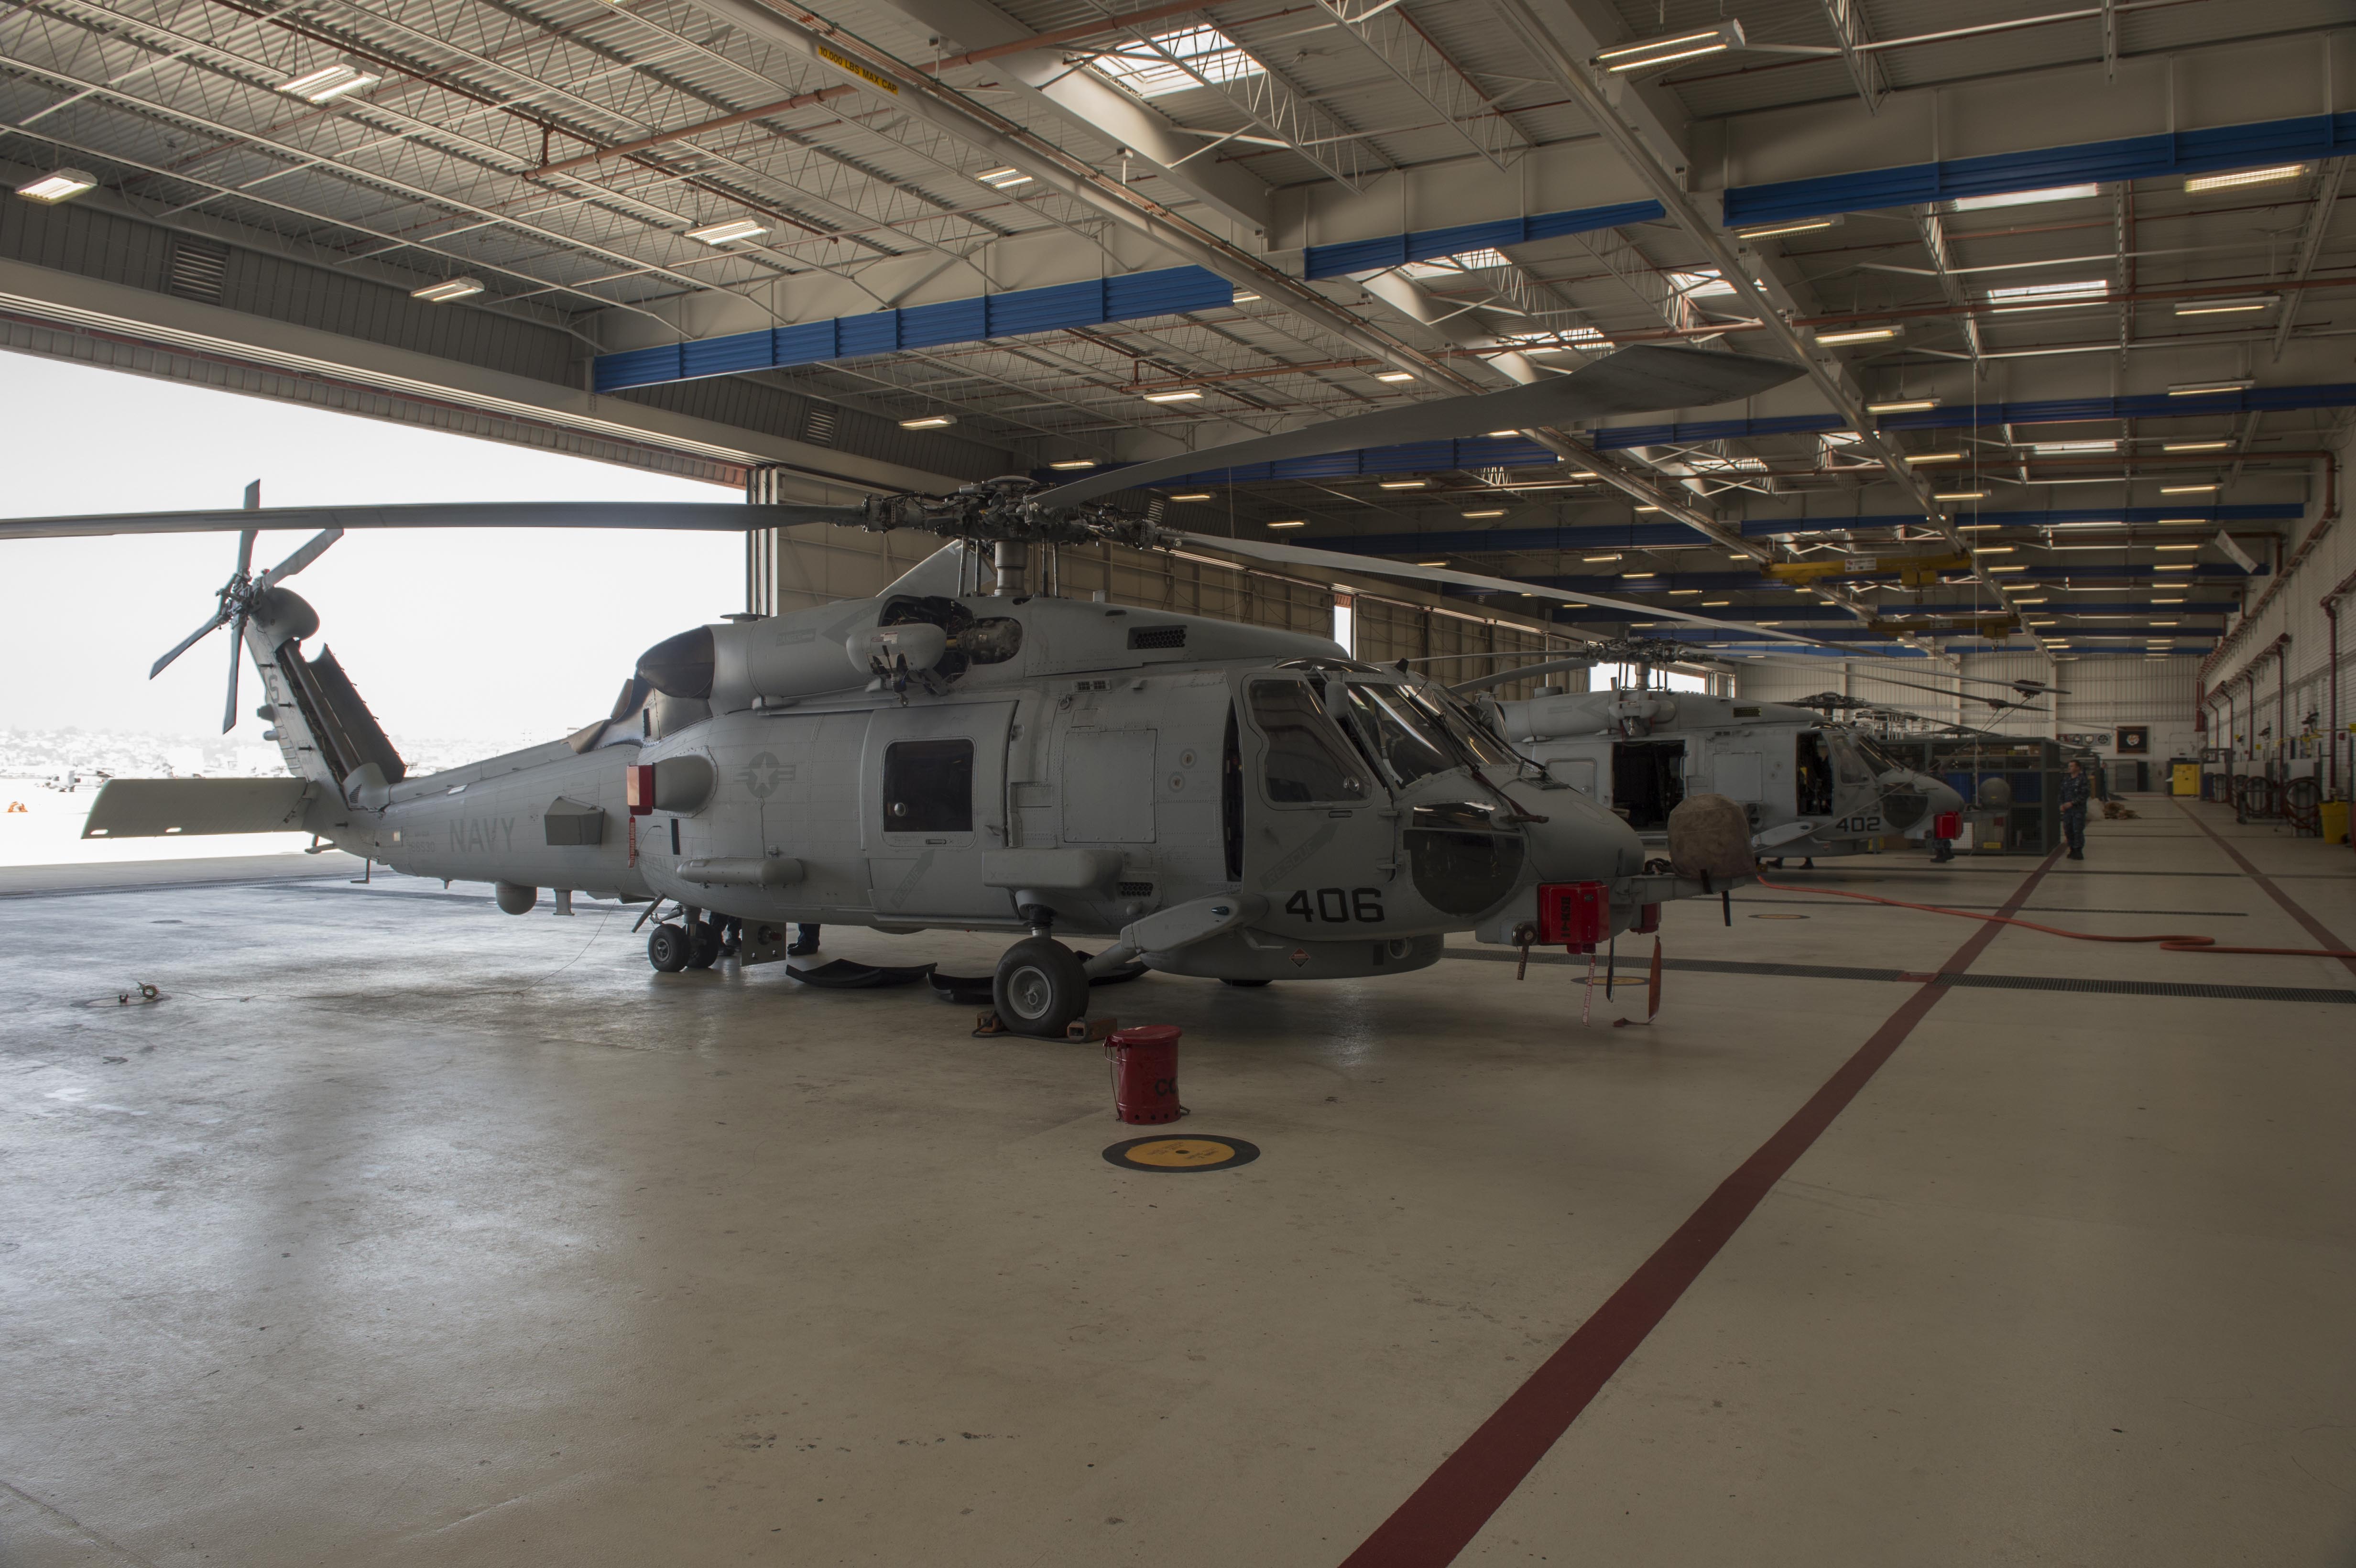 MH-60R Sea Hawk helicopters assigned to the Maritime Strike Squadron (HSM) 41 are parked on the flight line at Naval Air Station North Island. The Navy has spent its limited military construction funds on forward-located bases and training and maintenance facilities for new aircraft models, leaving little funding for maintaining and improving administrative and residential buildings. US Navy photo. 